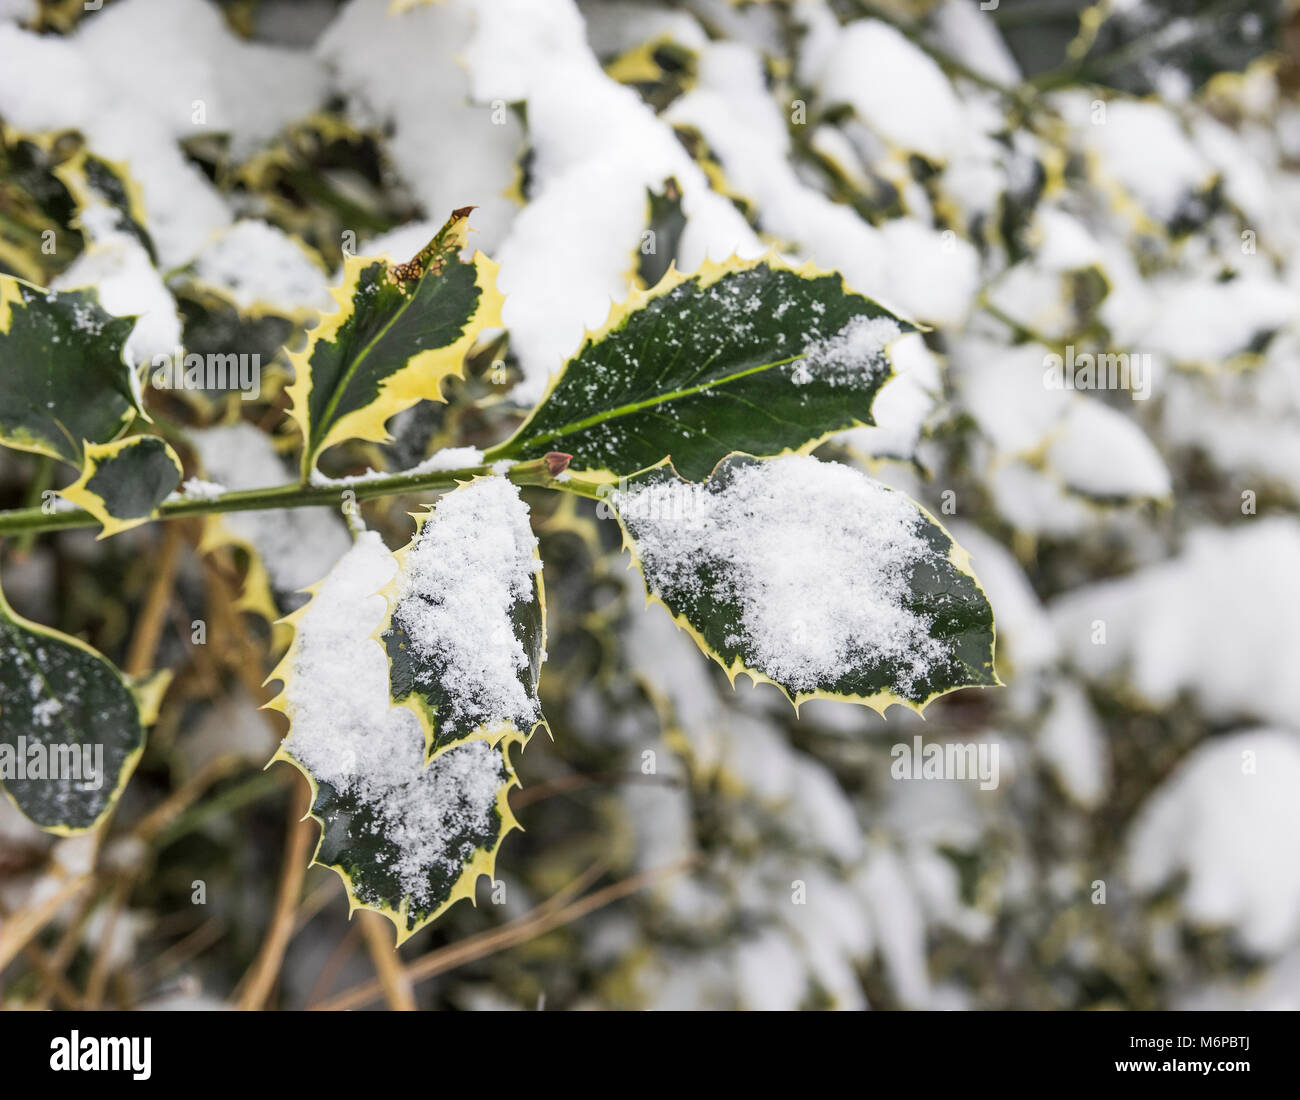 Leaves of the holly, Ilex, plant in winter snow, UK Stock Photo